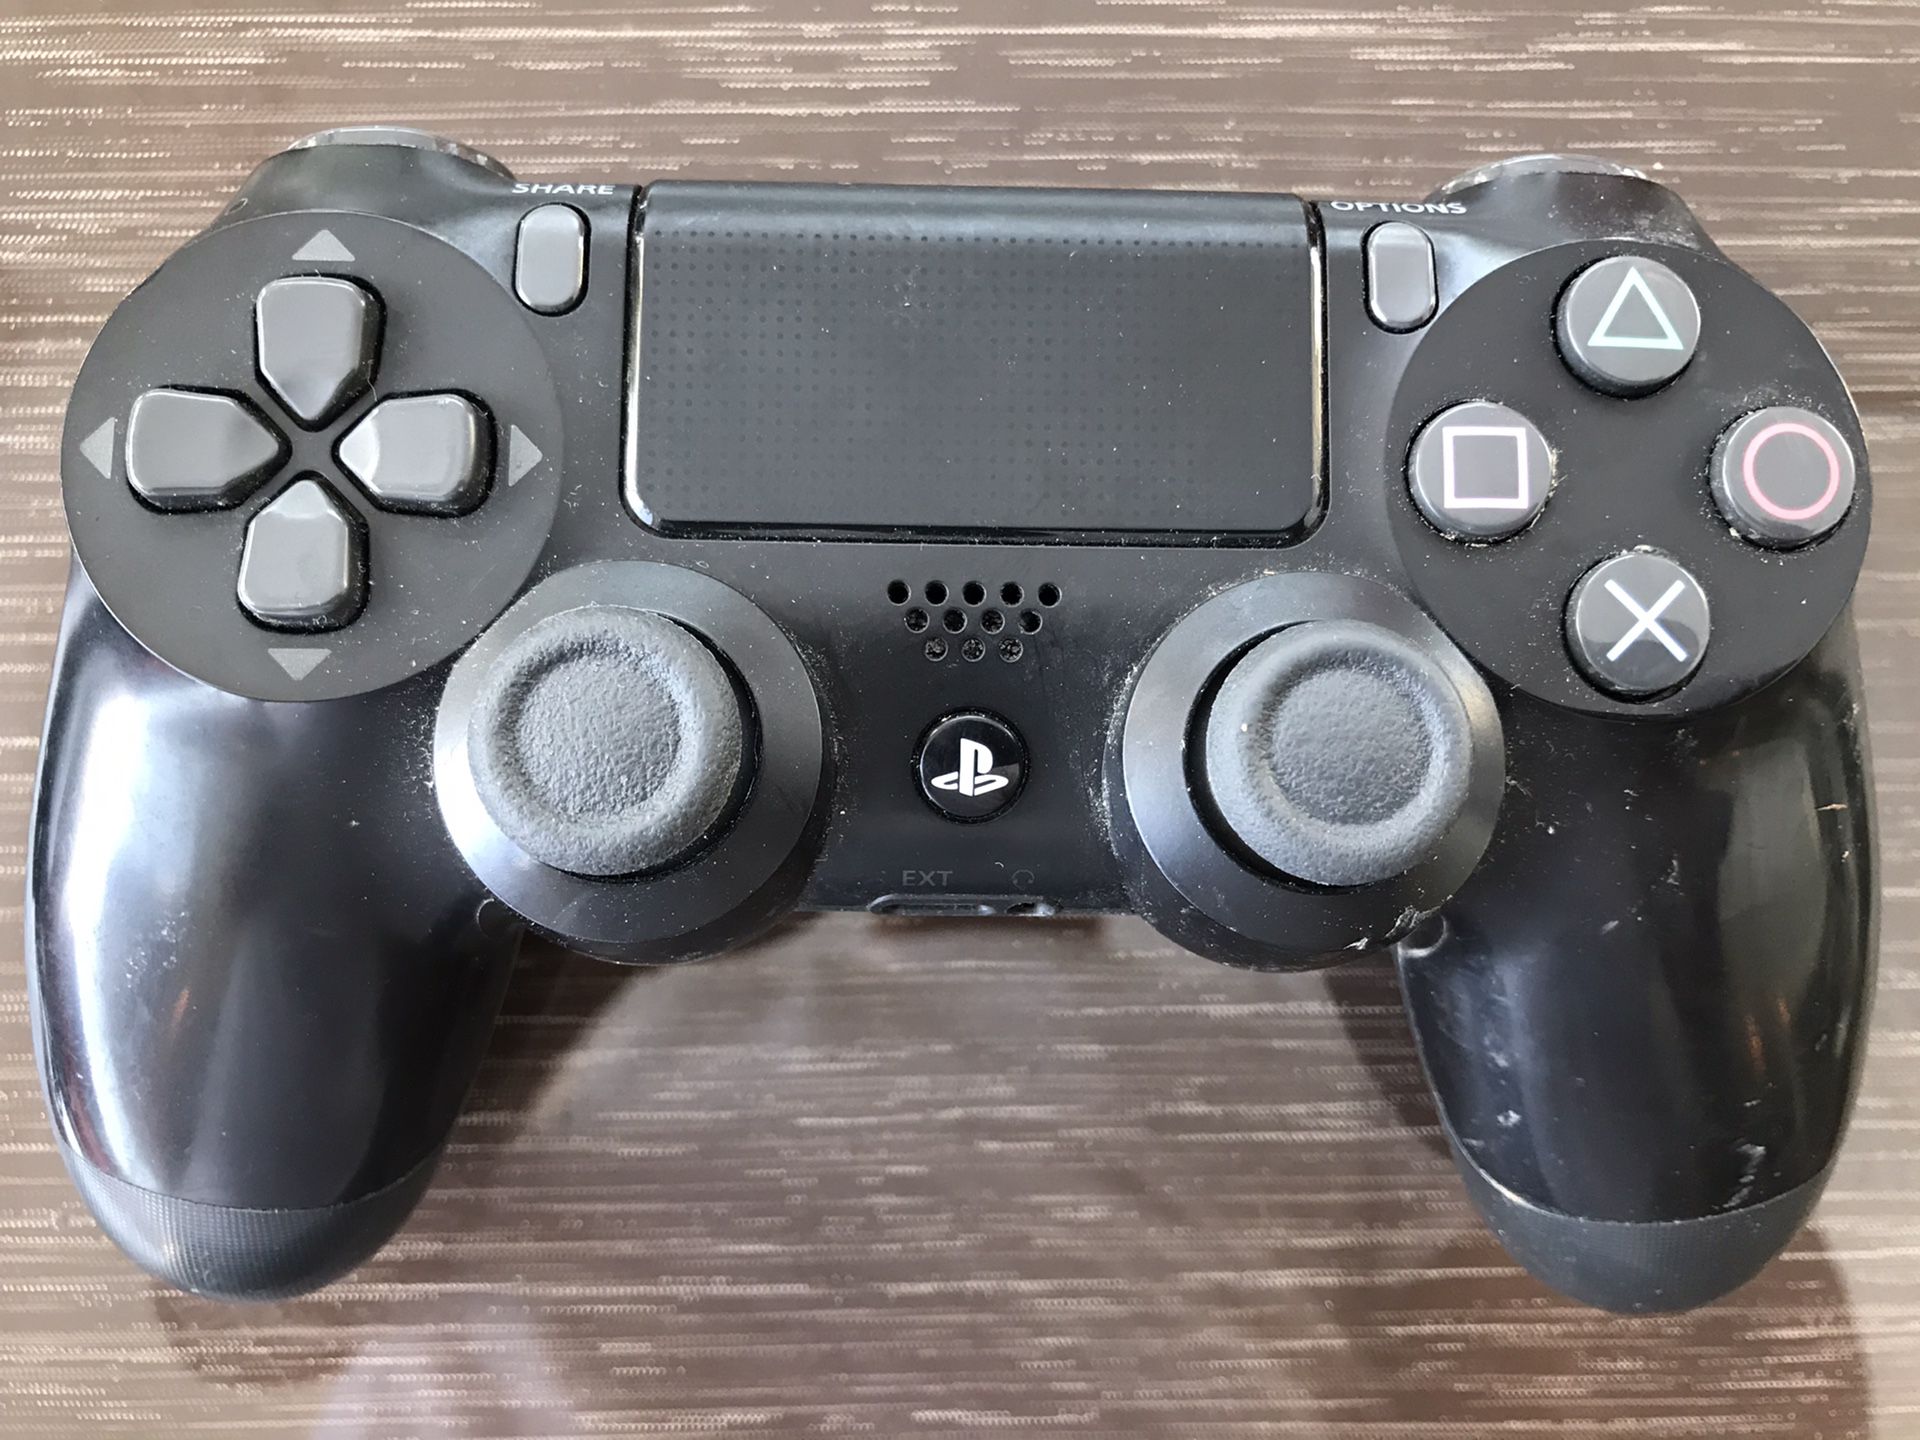 Play station Control (Sony)